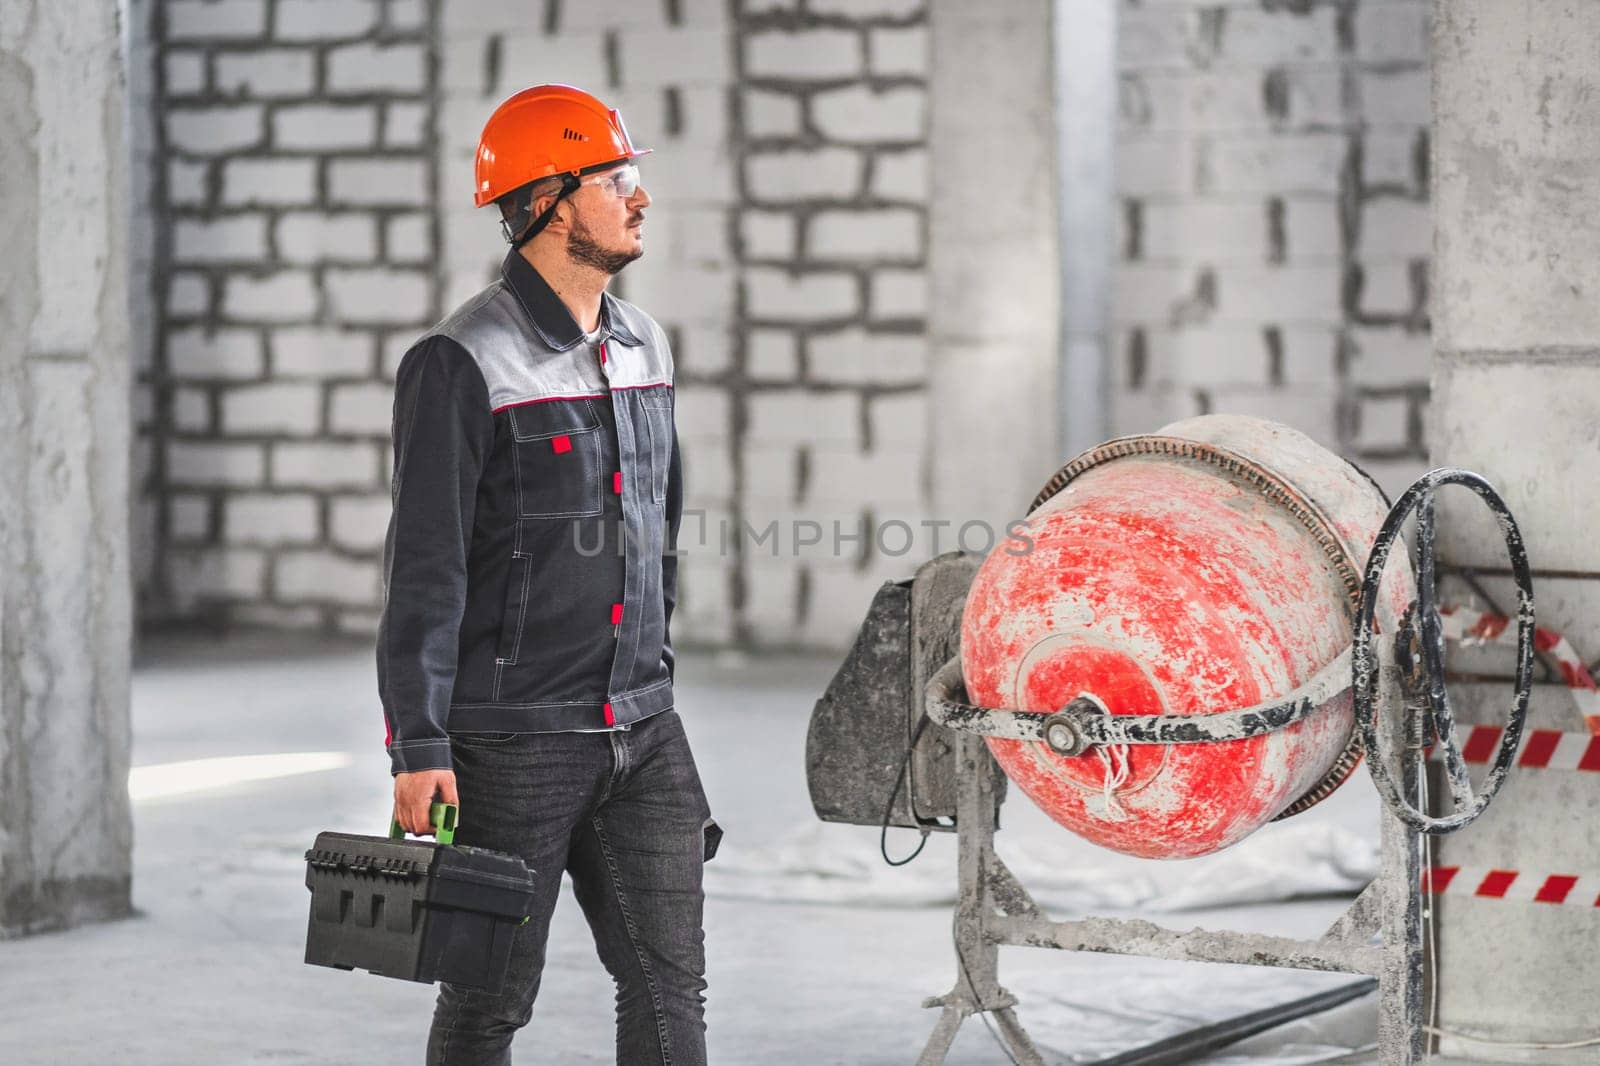 A worker with a suitcase with tools, in overalls, walks along a construction site past a concrete mixer.